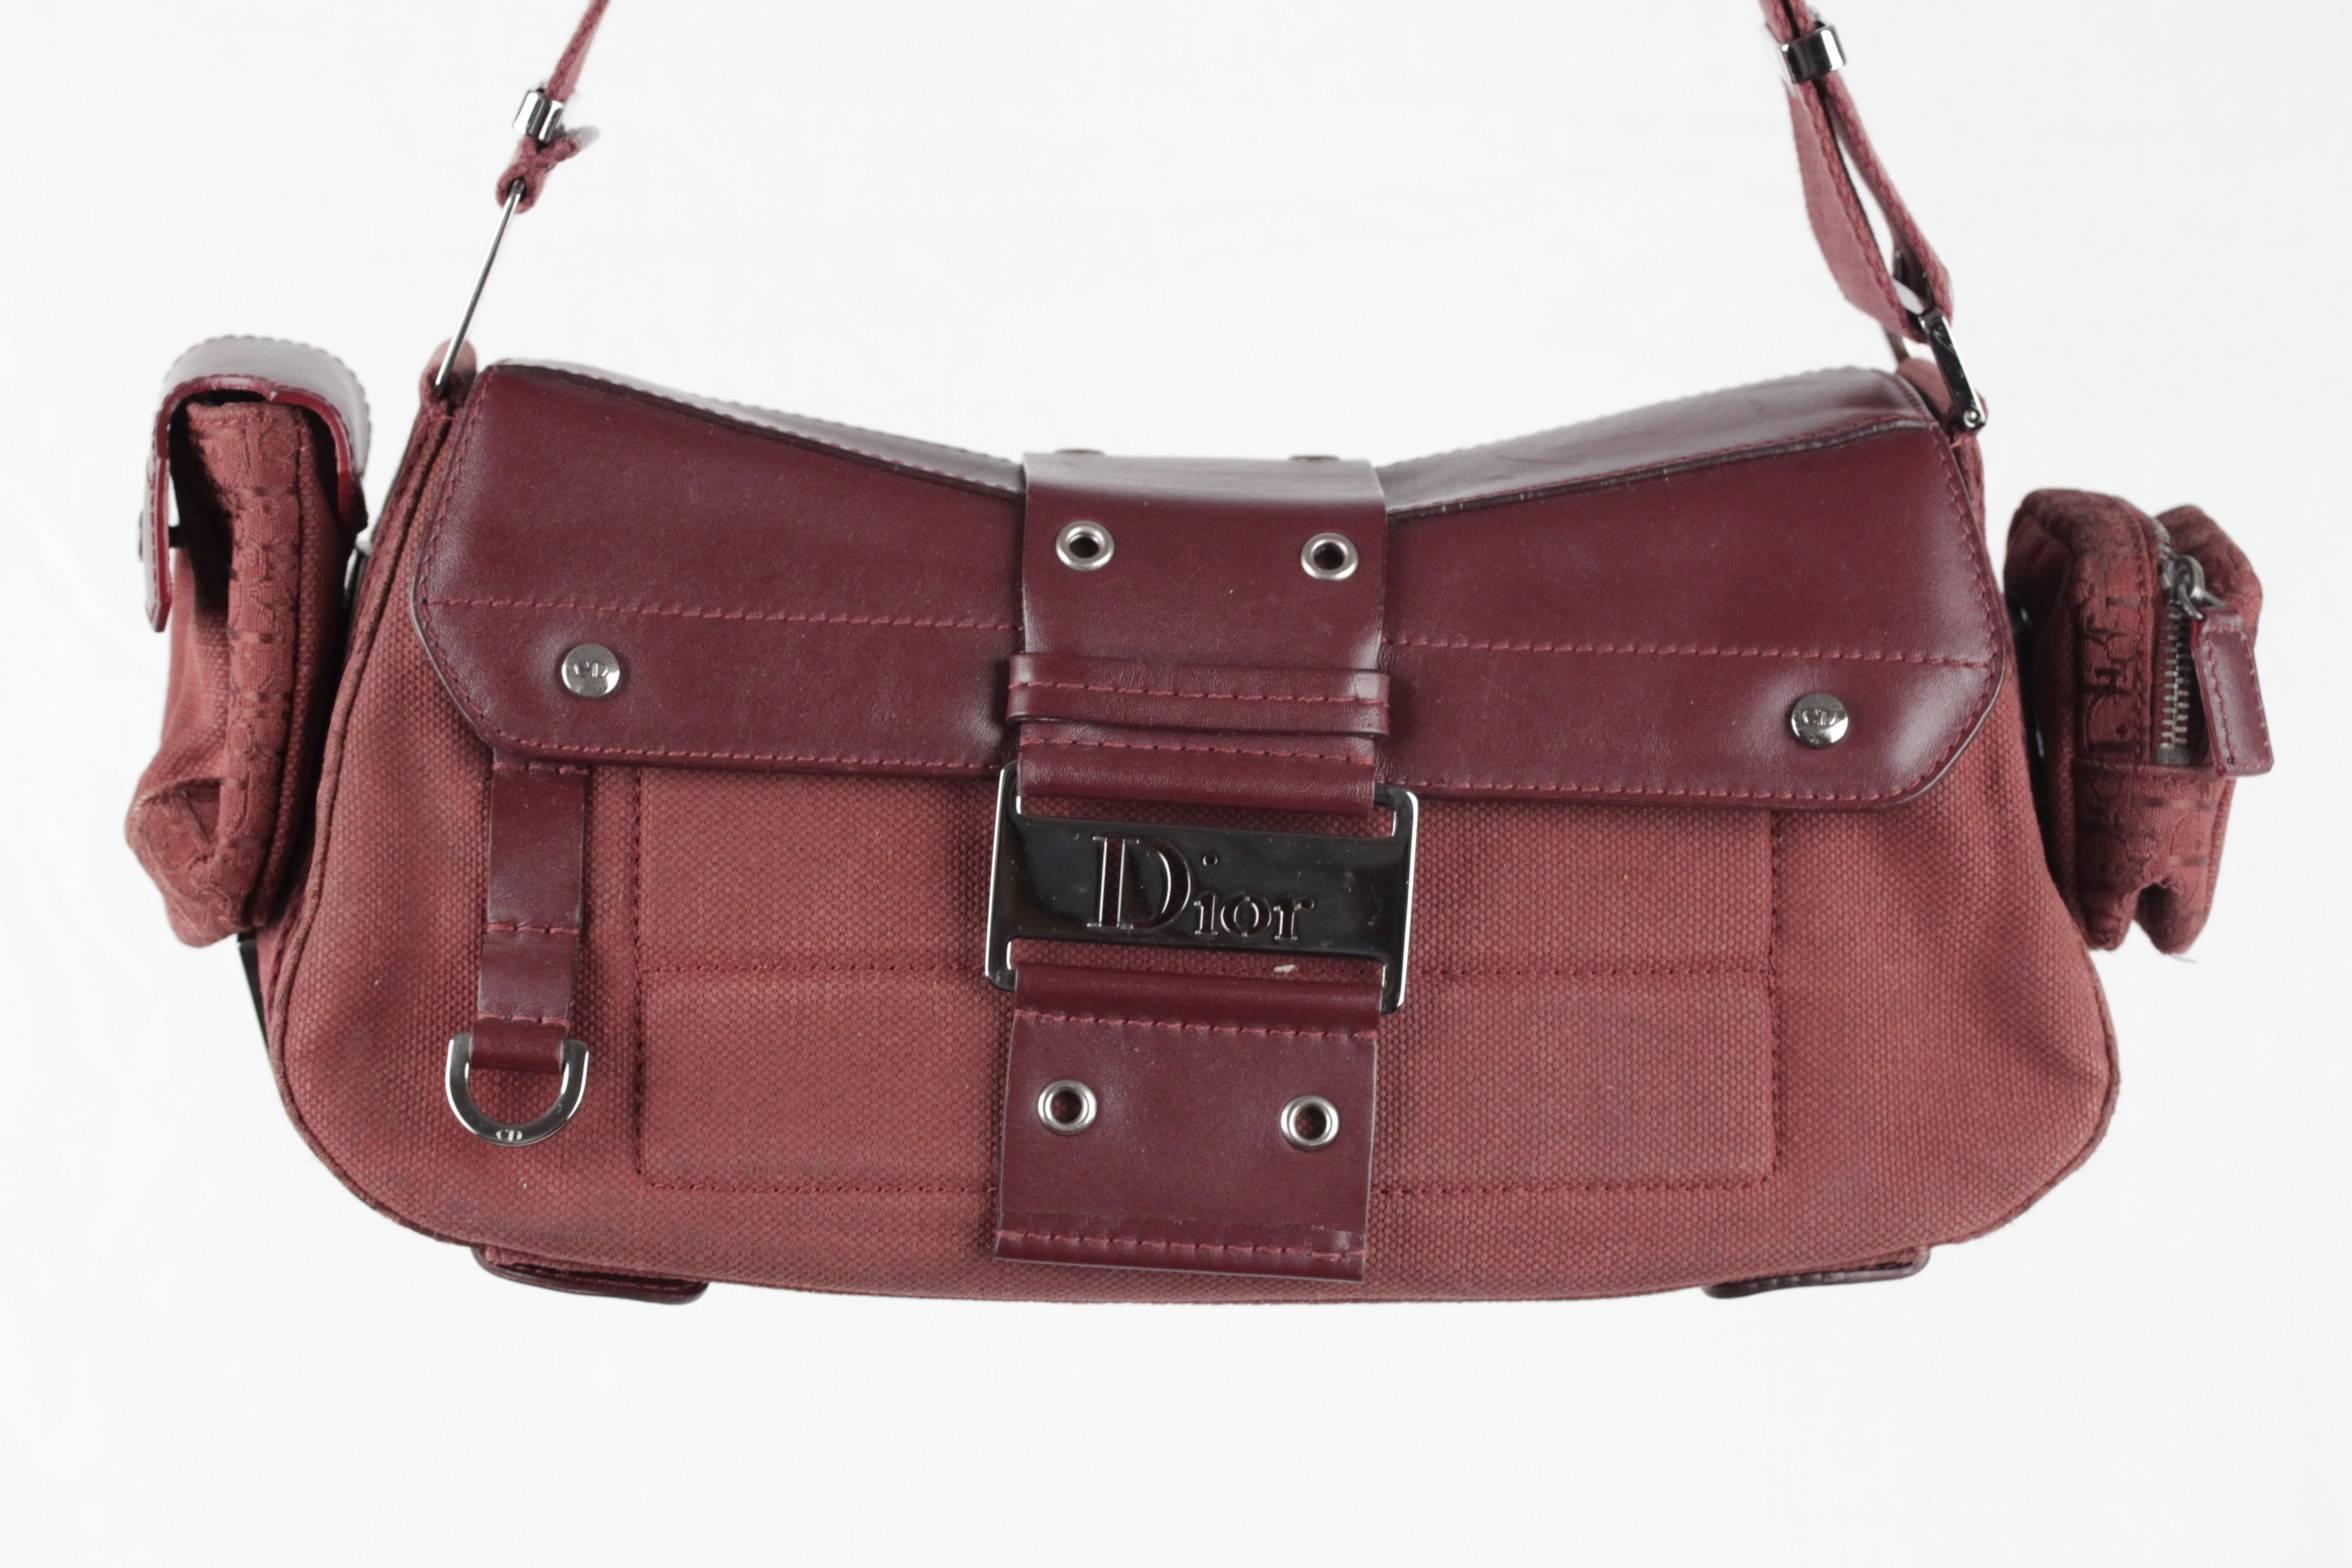  - Christian Dior Canvas 'Street Chic Columbus Avenue' Multipocket Bag, inspired by classic utility bags
- 4 detachable pouches to hold your cell phone and othersmall items (two with snap closures, two with zip closures)
- Burgundy structured